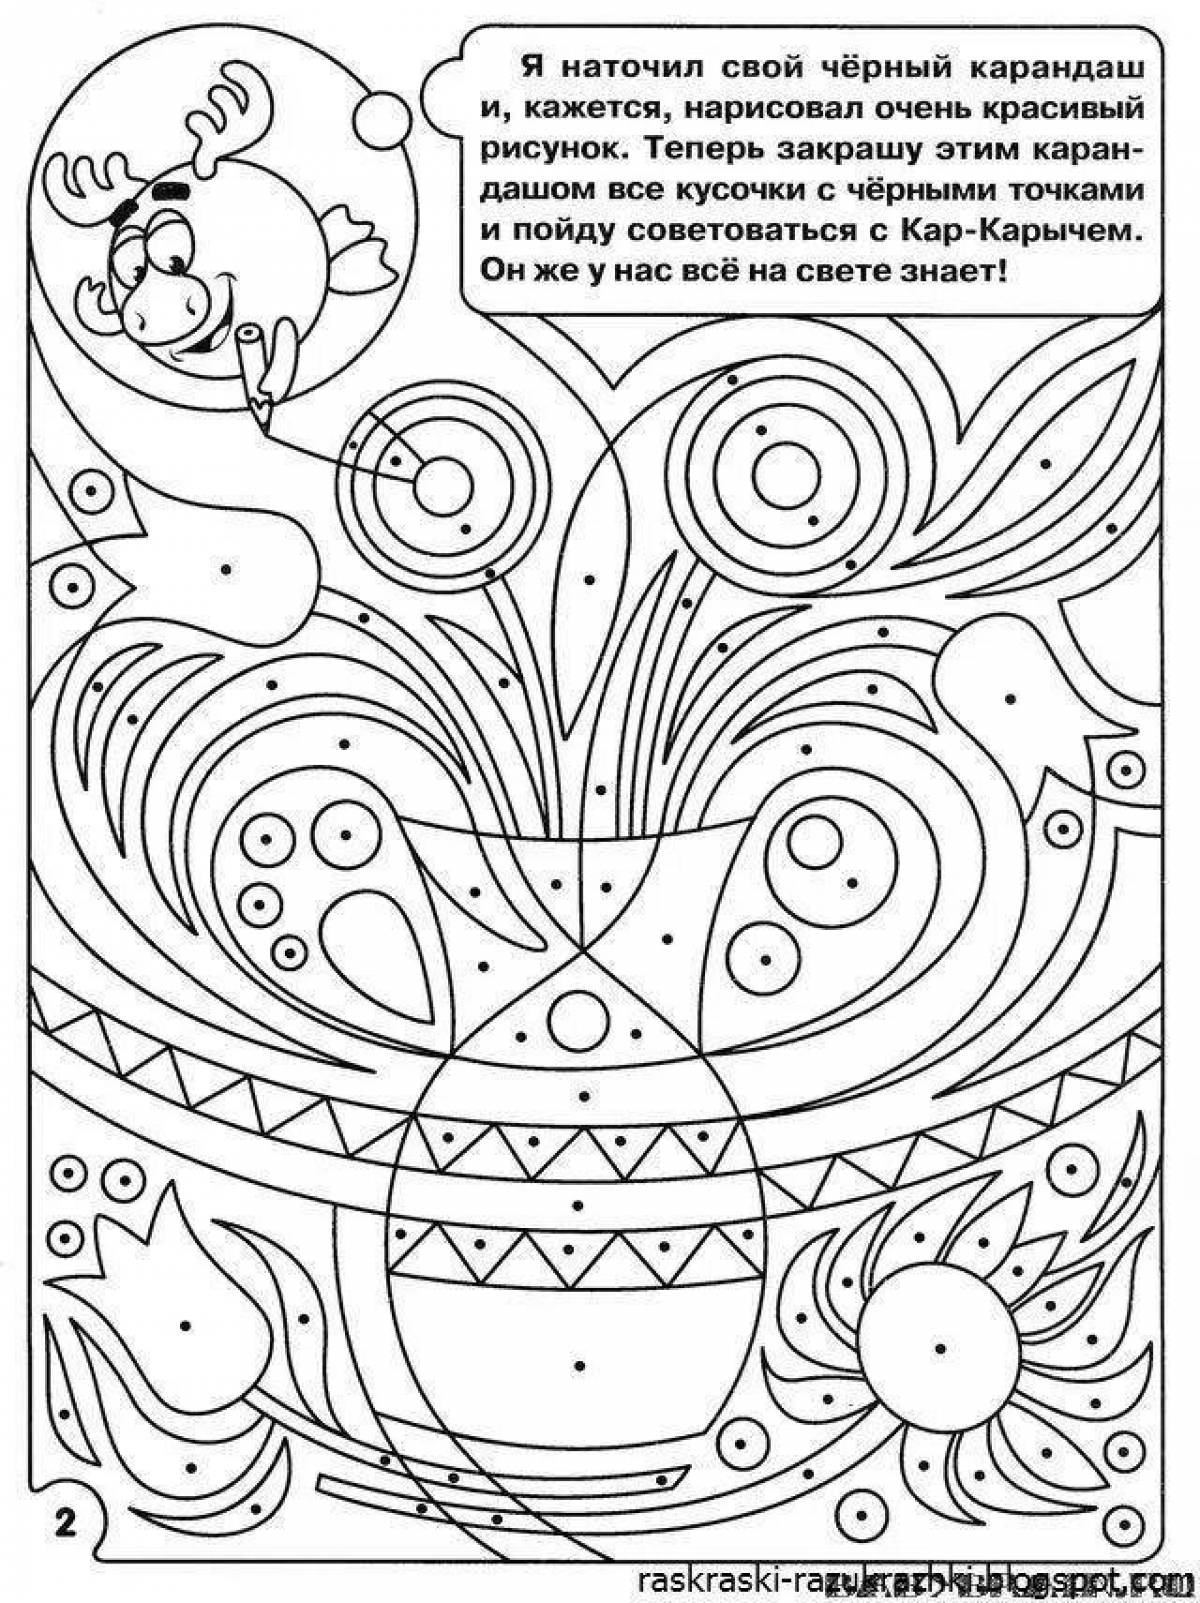 Adorable coloring book for kids 6-7 years old